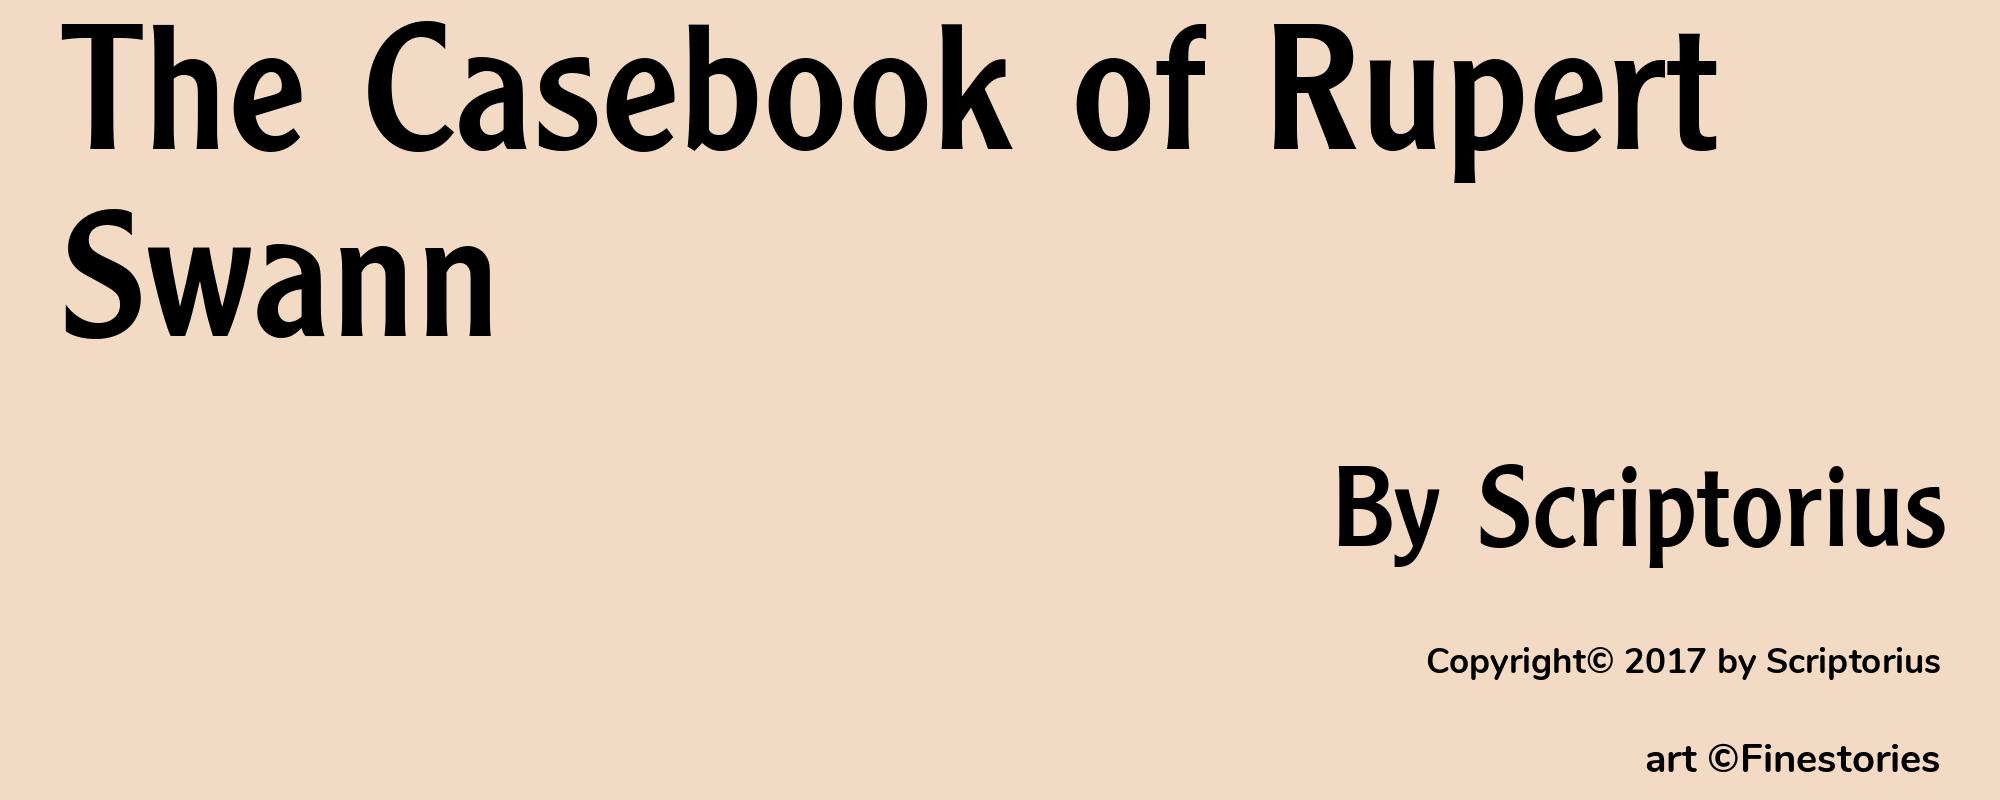 The Casebook of Rupert Swann - Cover